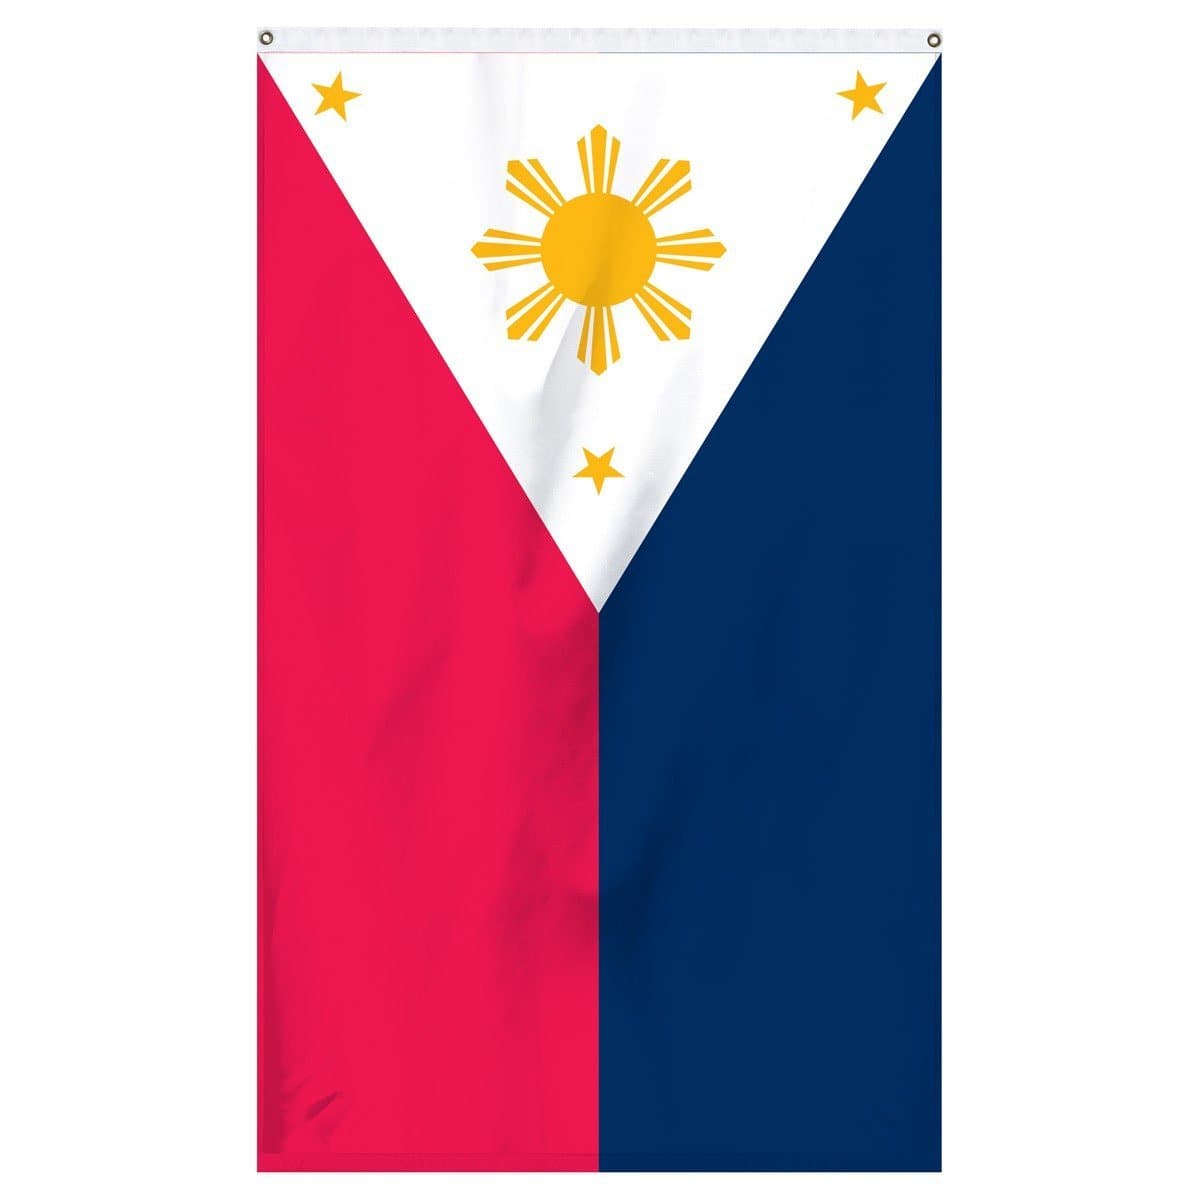 Philippines national flag for sale to buy online now from the American company Atlantic Flag and Pole